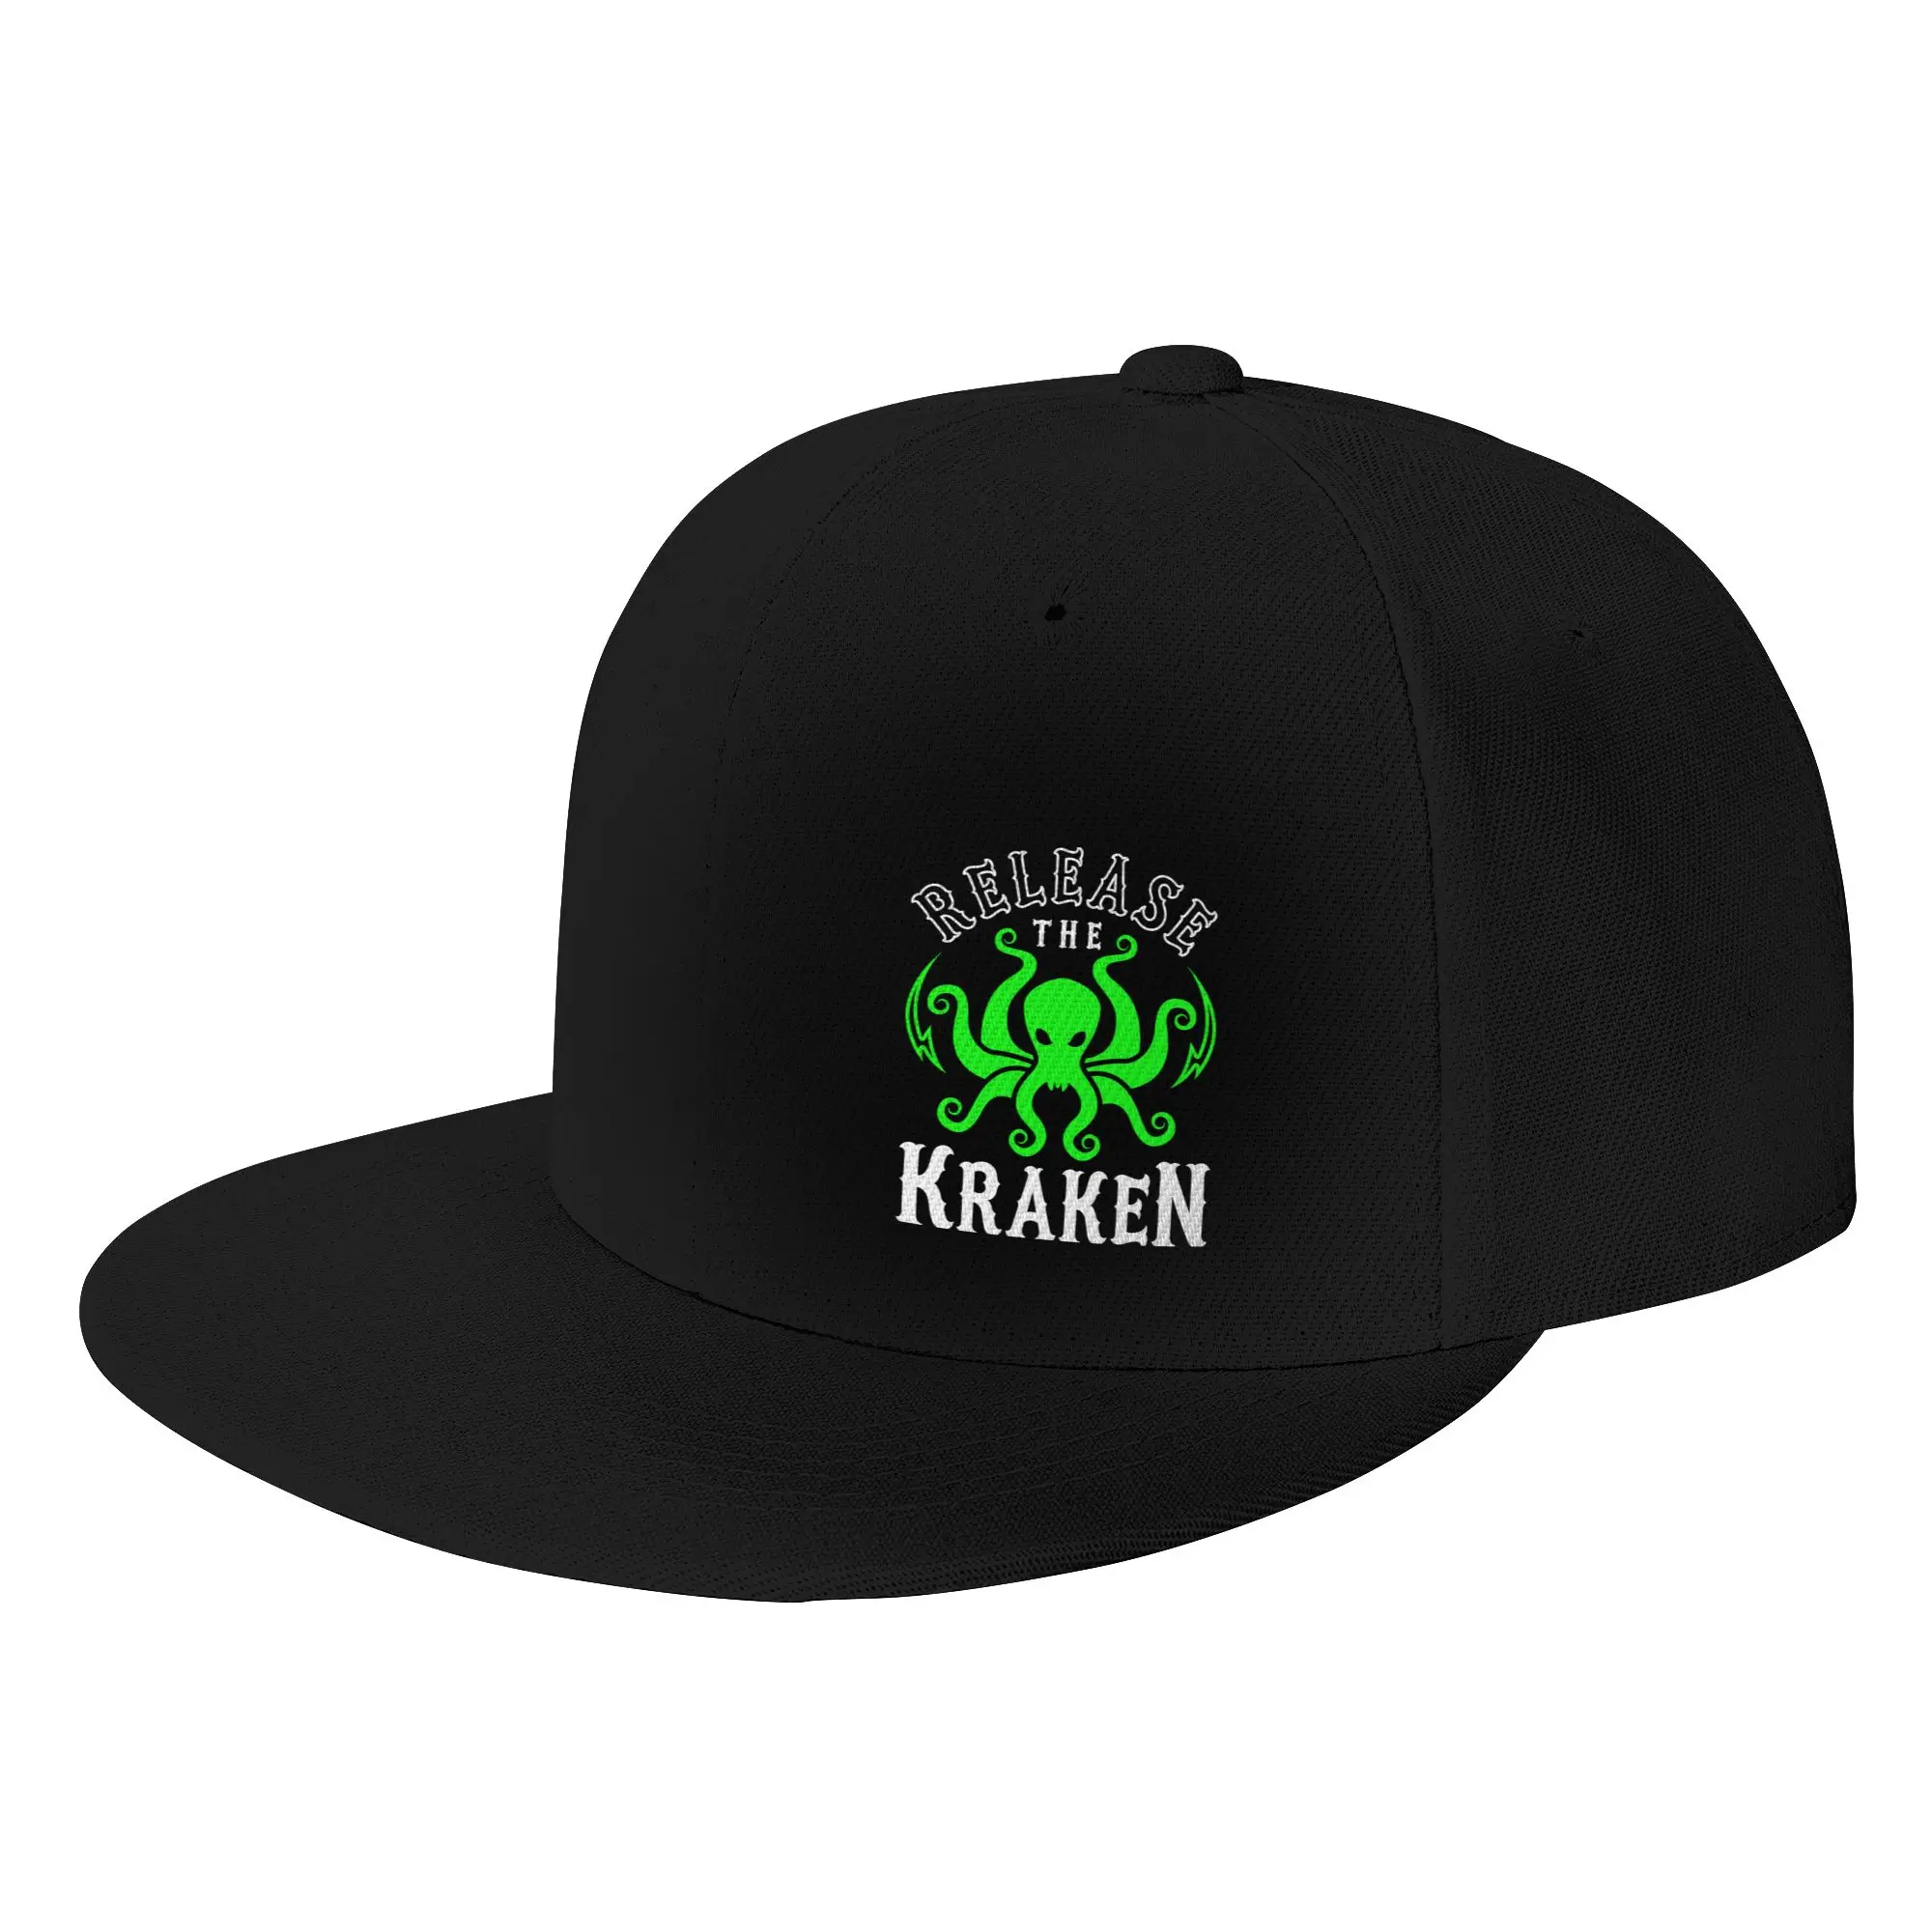 Release The Kraken Print Baseball Cap Gifts Hiphop Pop Style Hat for Men Women Kids Daily Use Accessories To Carry One Size